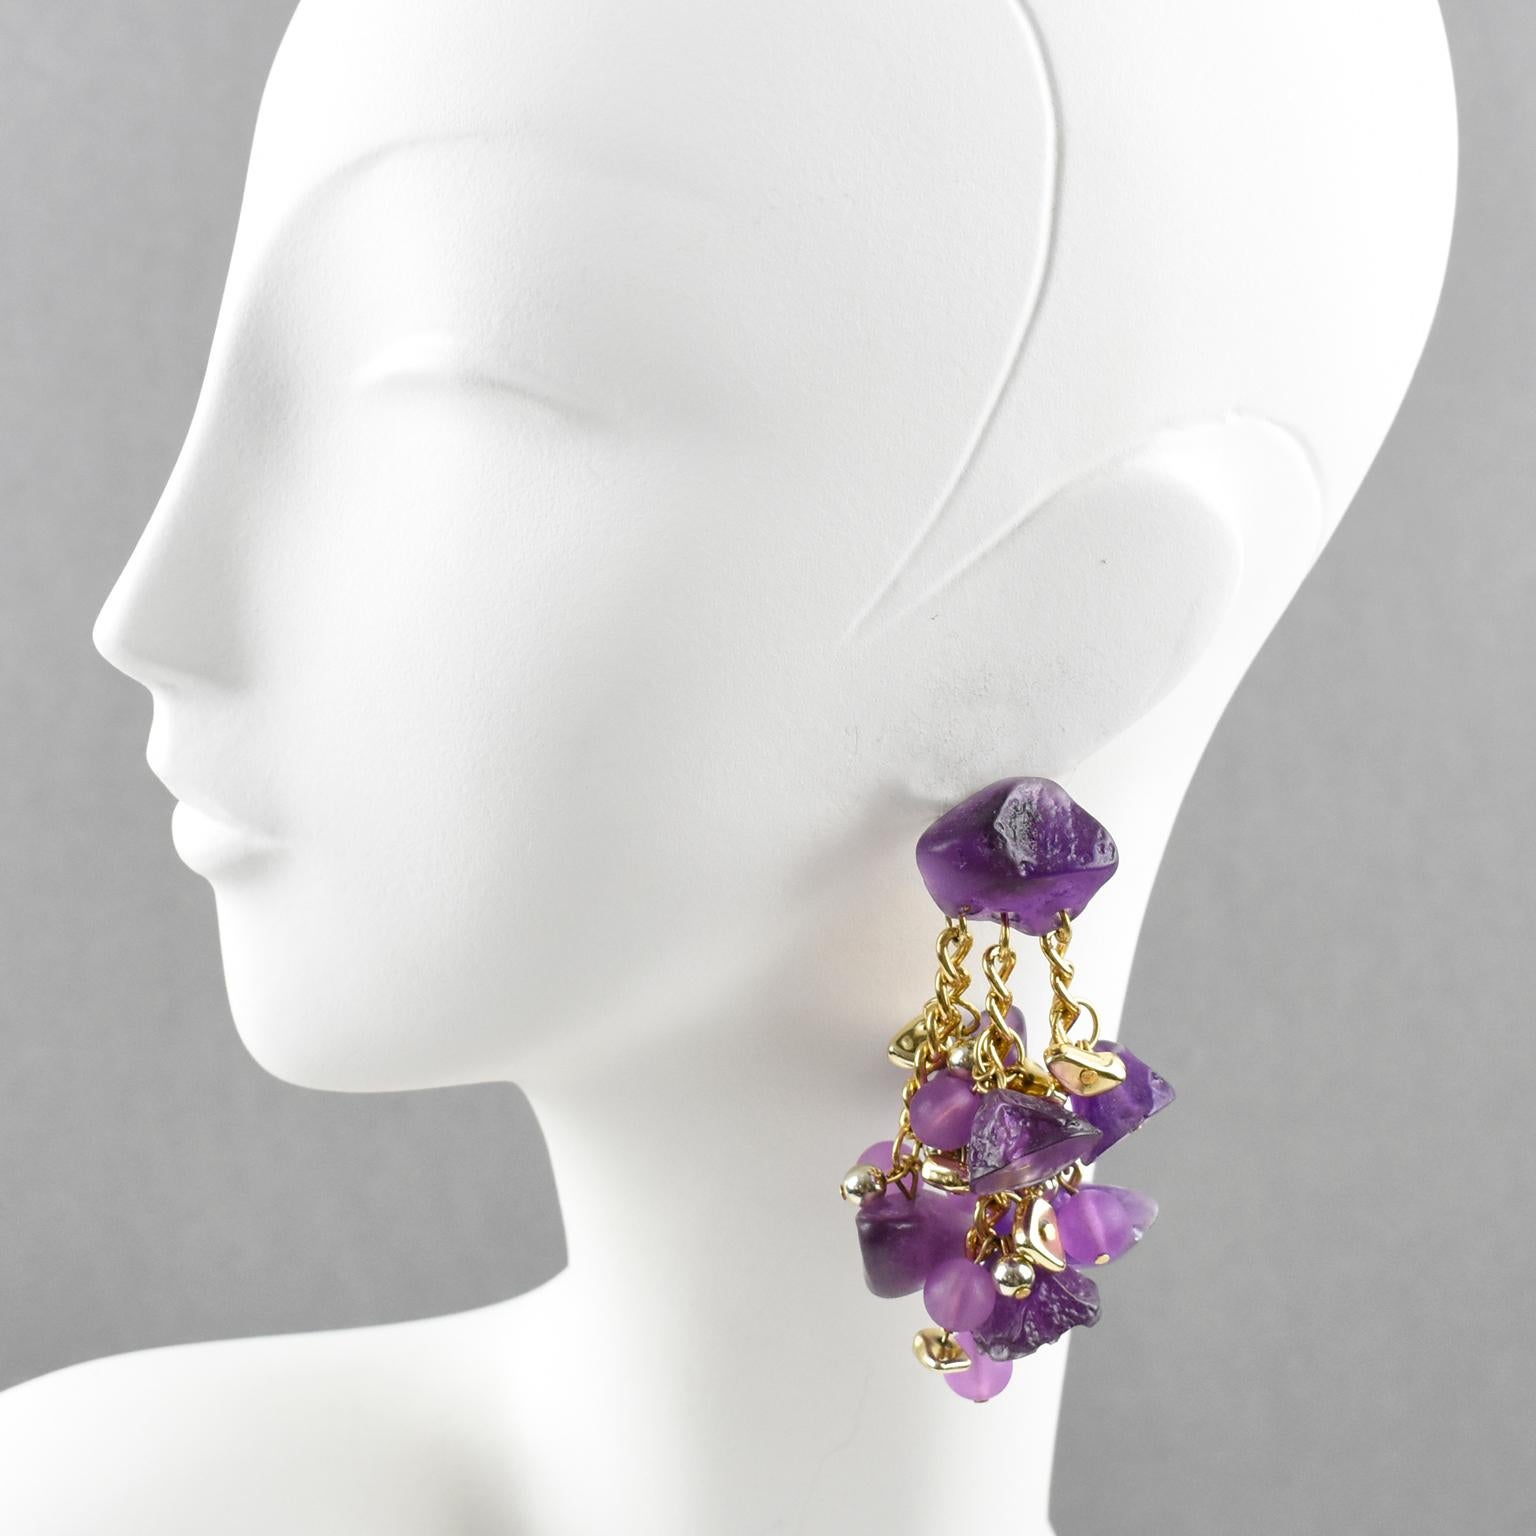 These stunning designer studio oversized chandelier Lucite pierced earrings feature a dimensional dangling shape with gilded metal multi-chain ornate with dangling pebble and bead charms. The pieces boast an intense frosted purple color. These